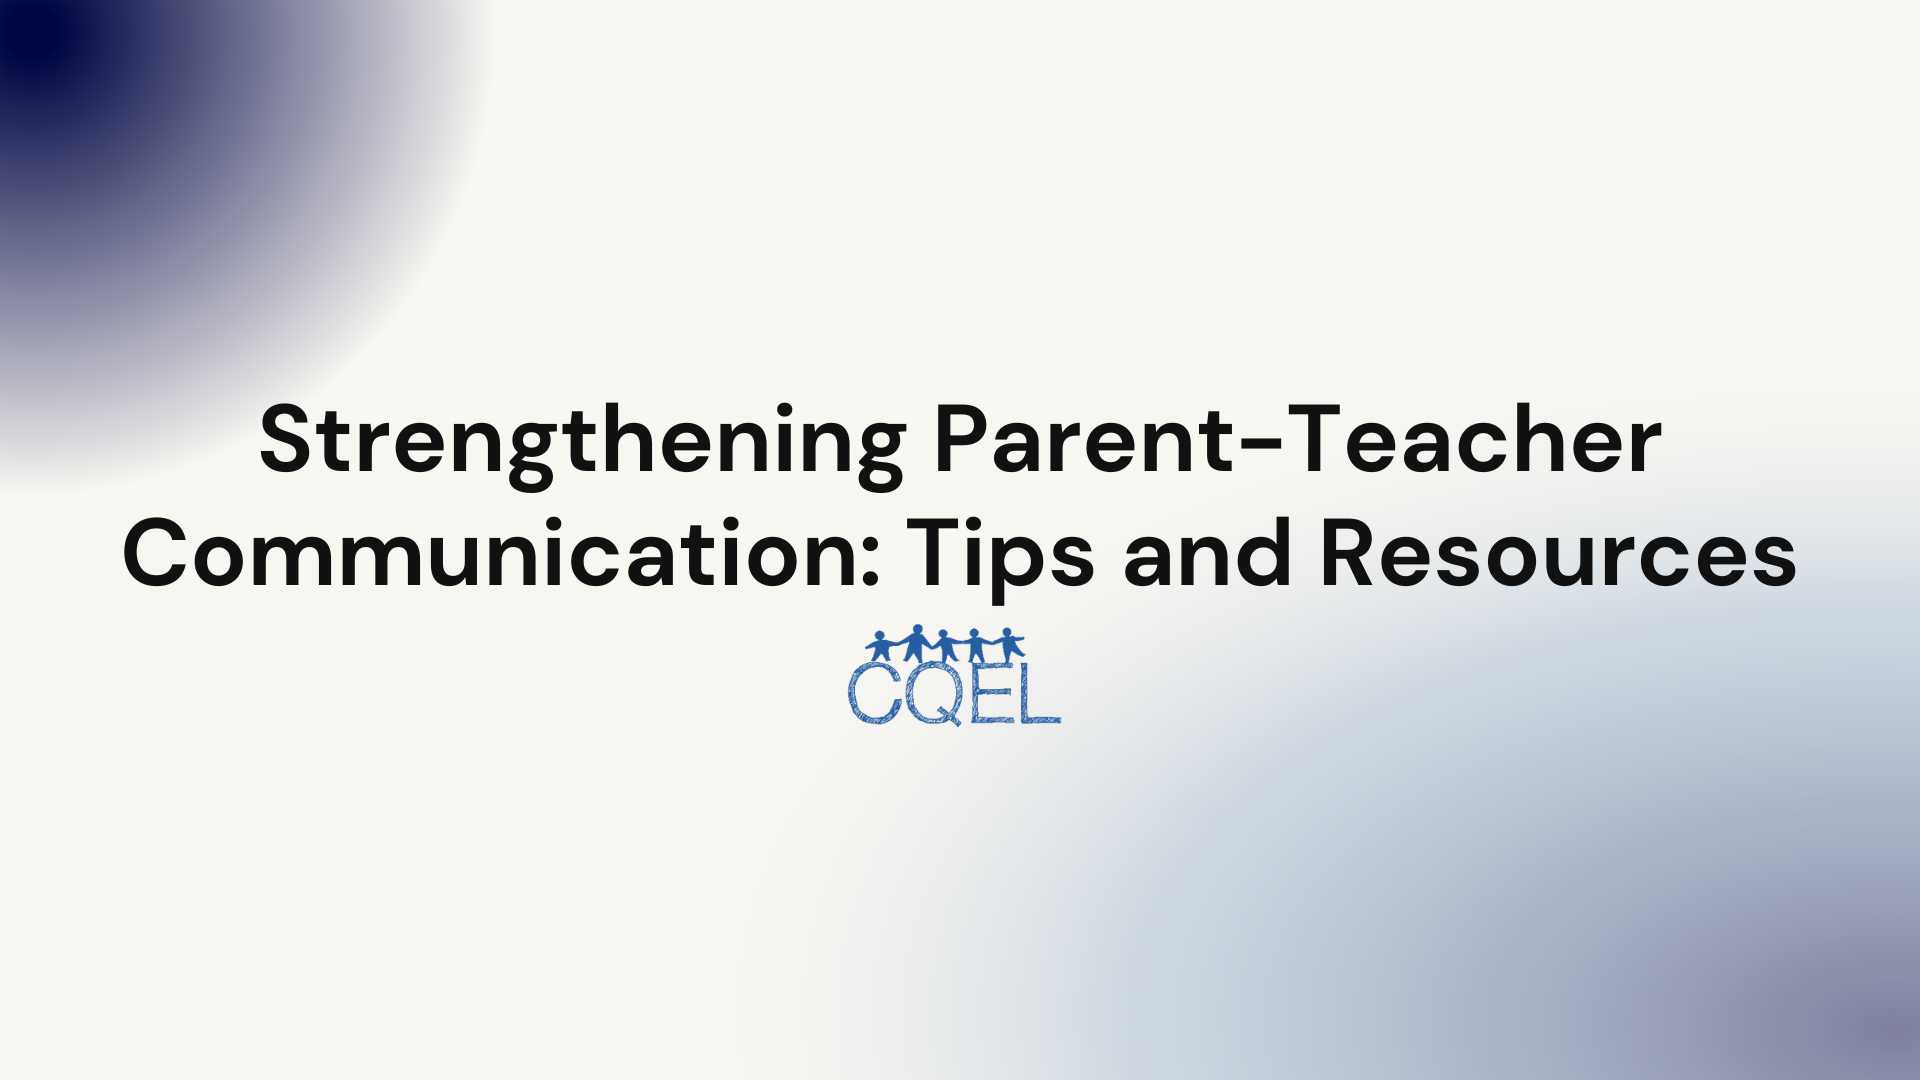 Strengthening Parent-Teacher Communication: Tips and Resources